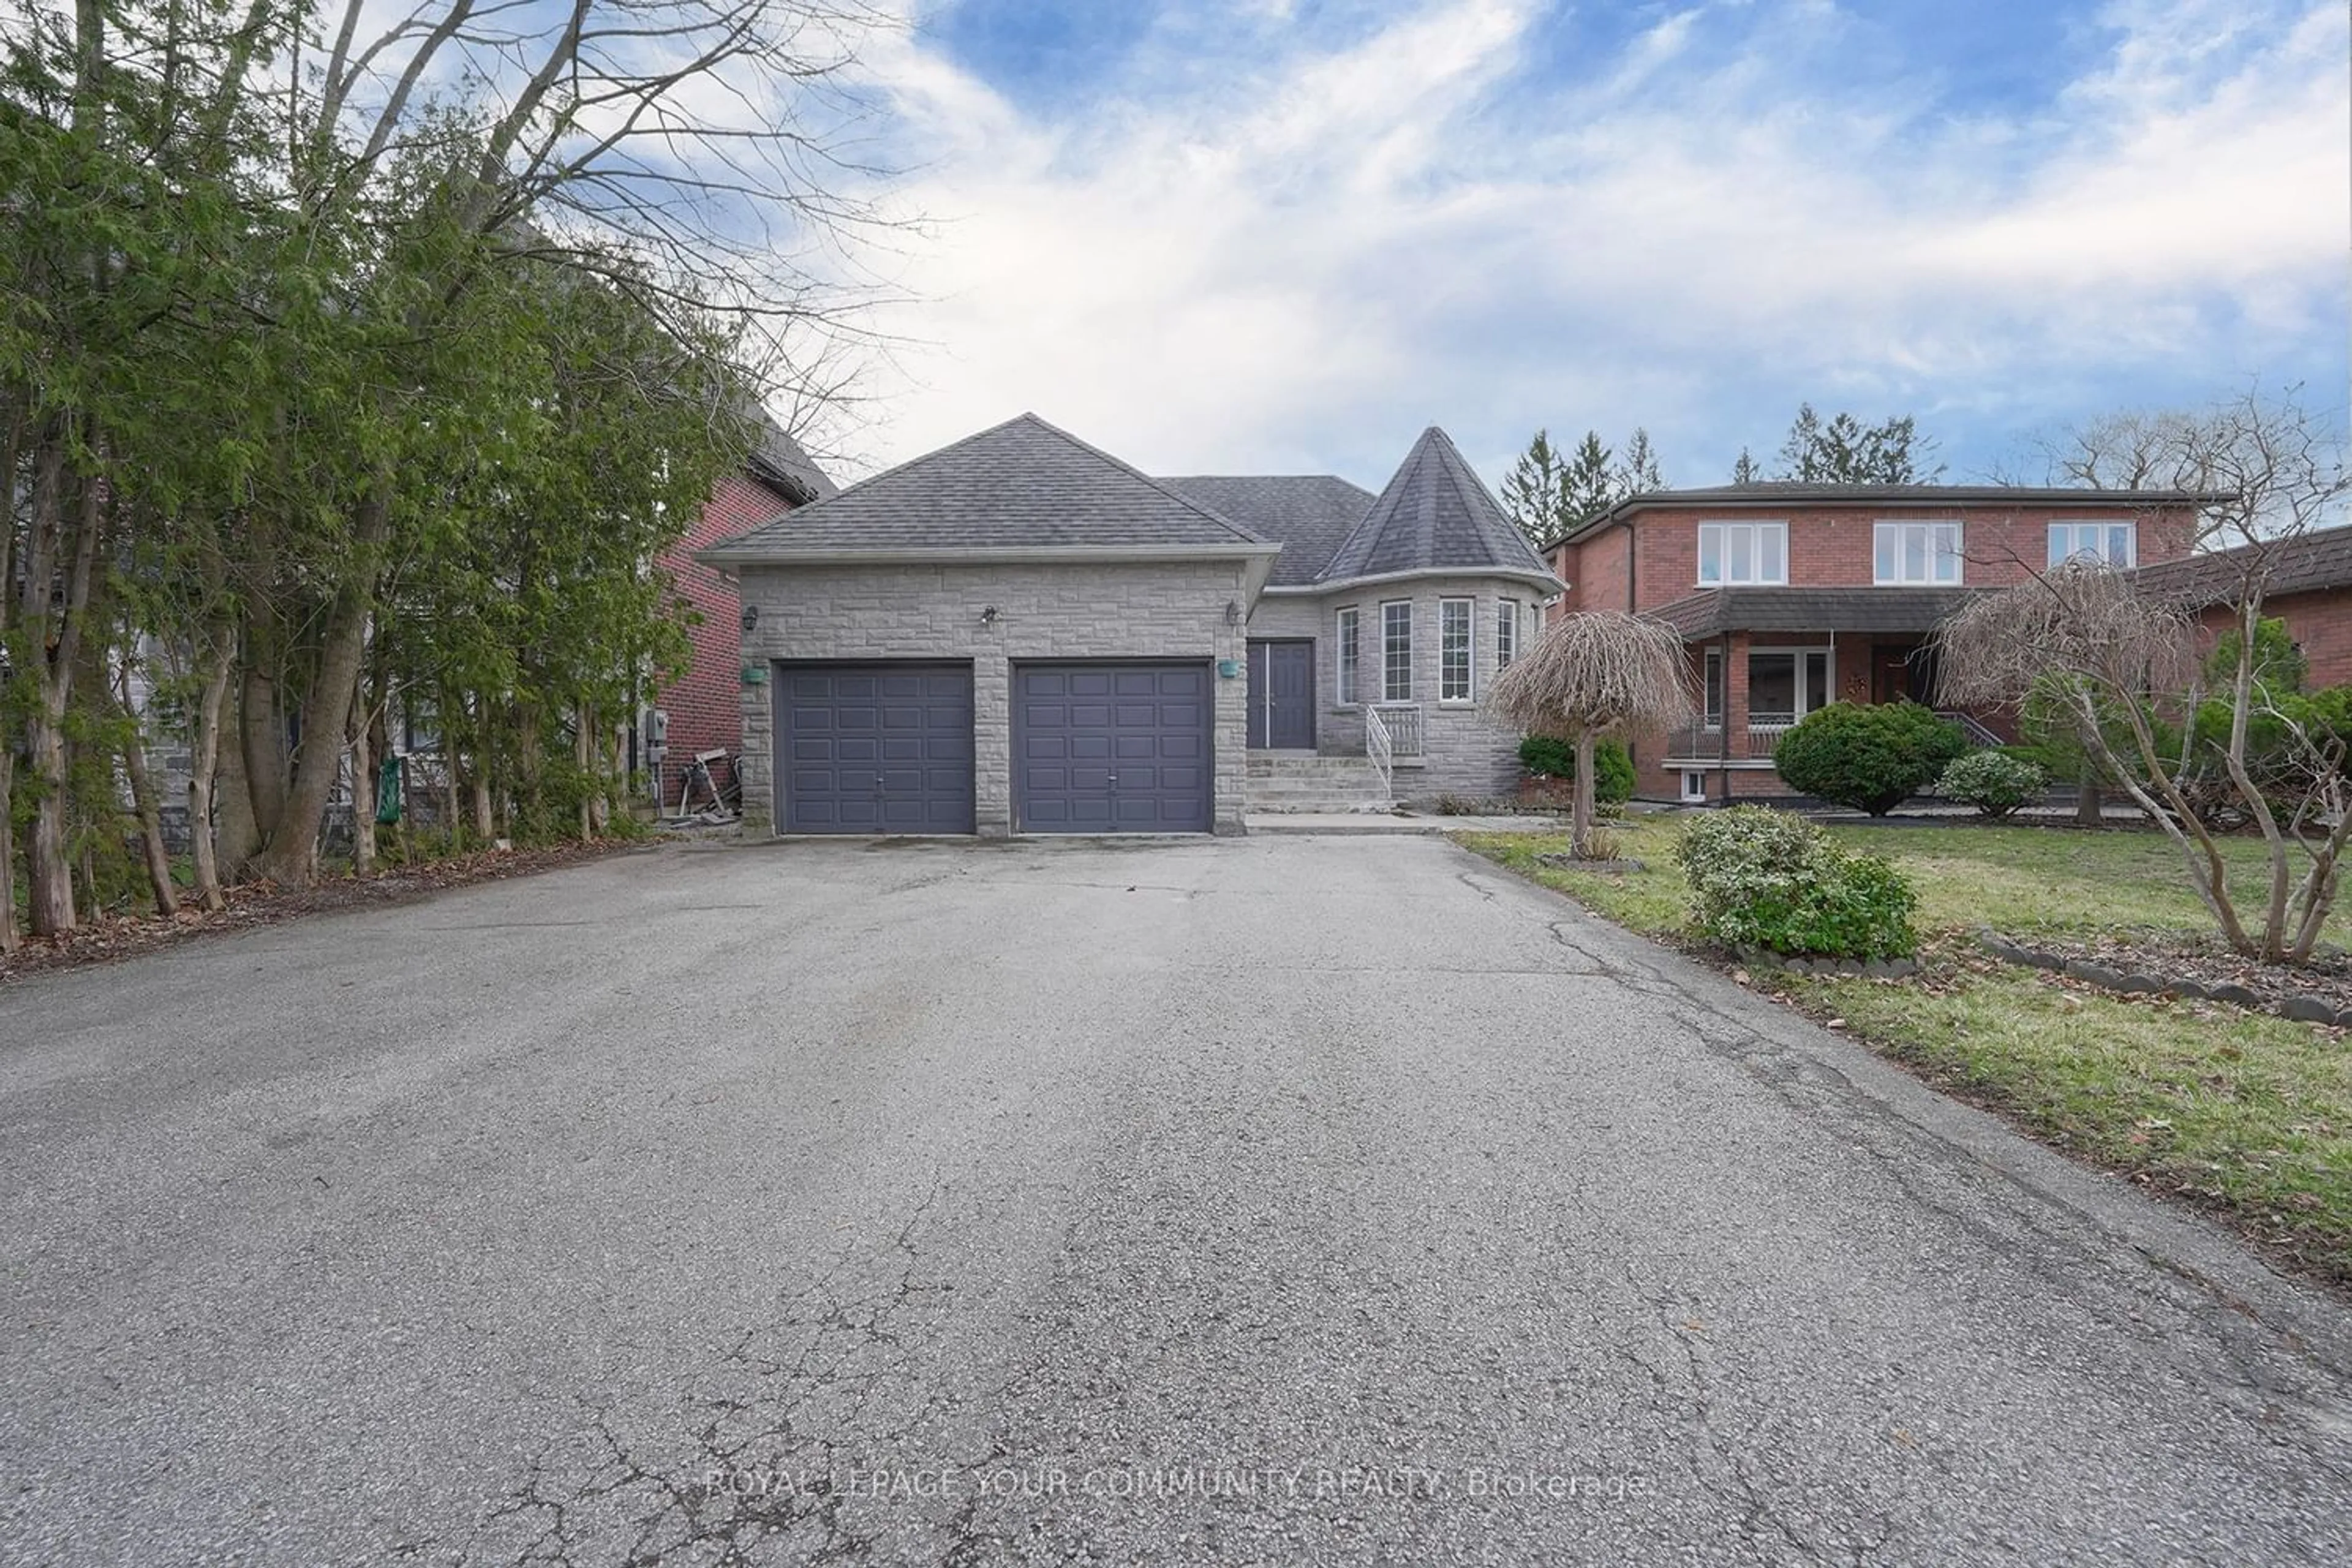 Frontside or backside of a home for 421 Sunset Beach Rd, Richmond Hill Ontario L4E 3J1